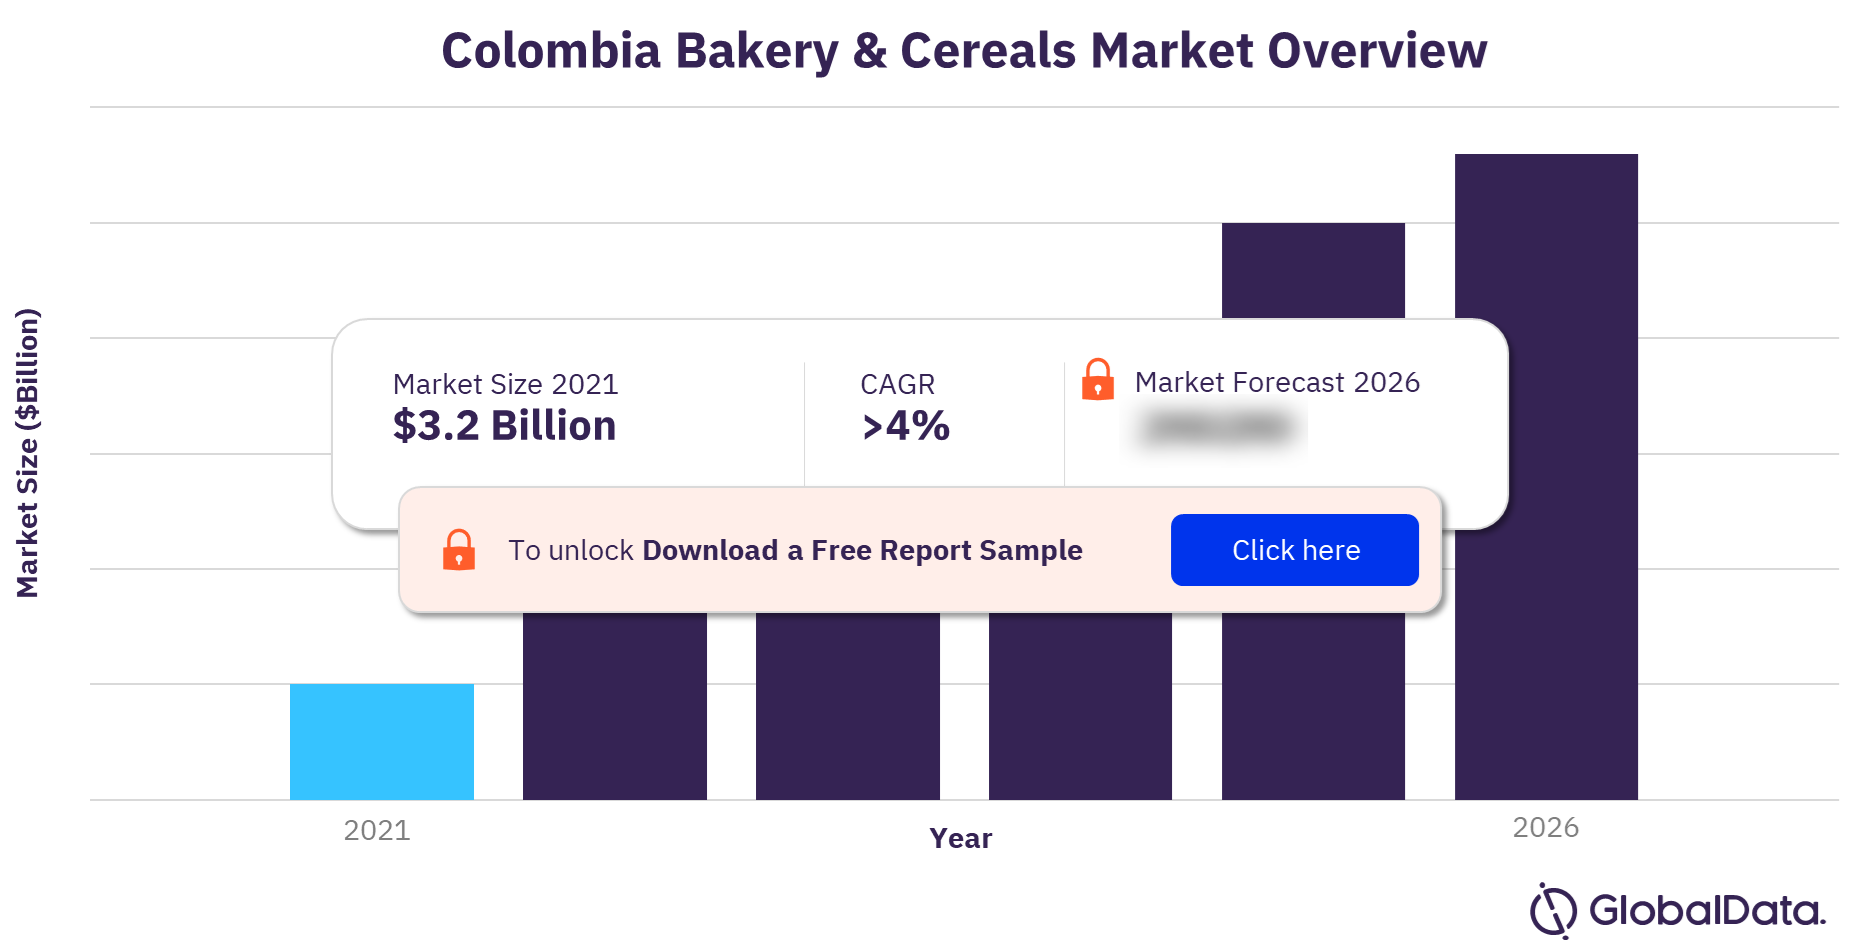 Colombia Bakery & Cereals Market Outlook